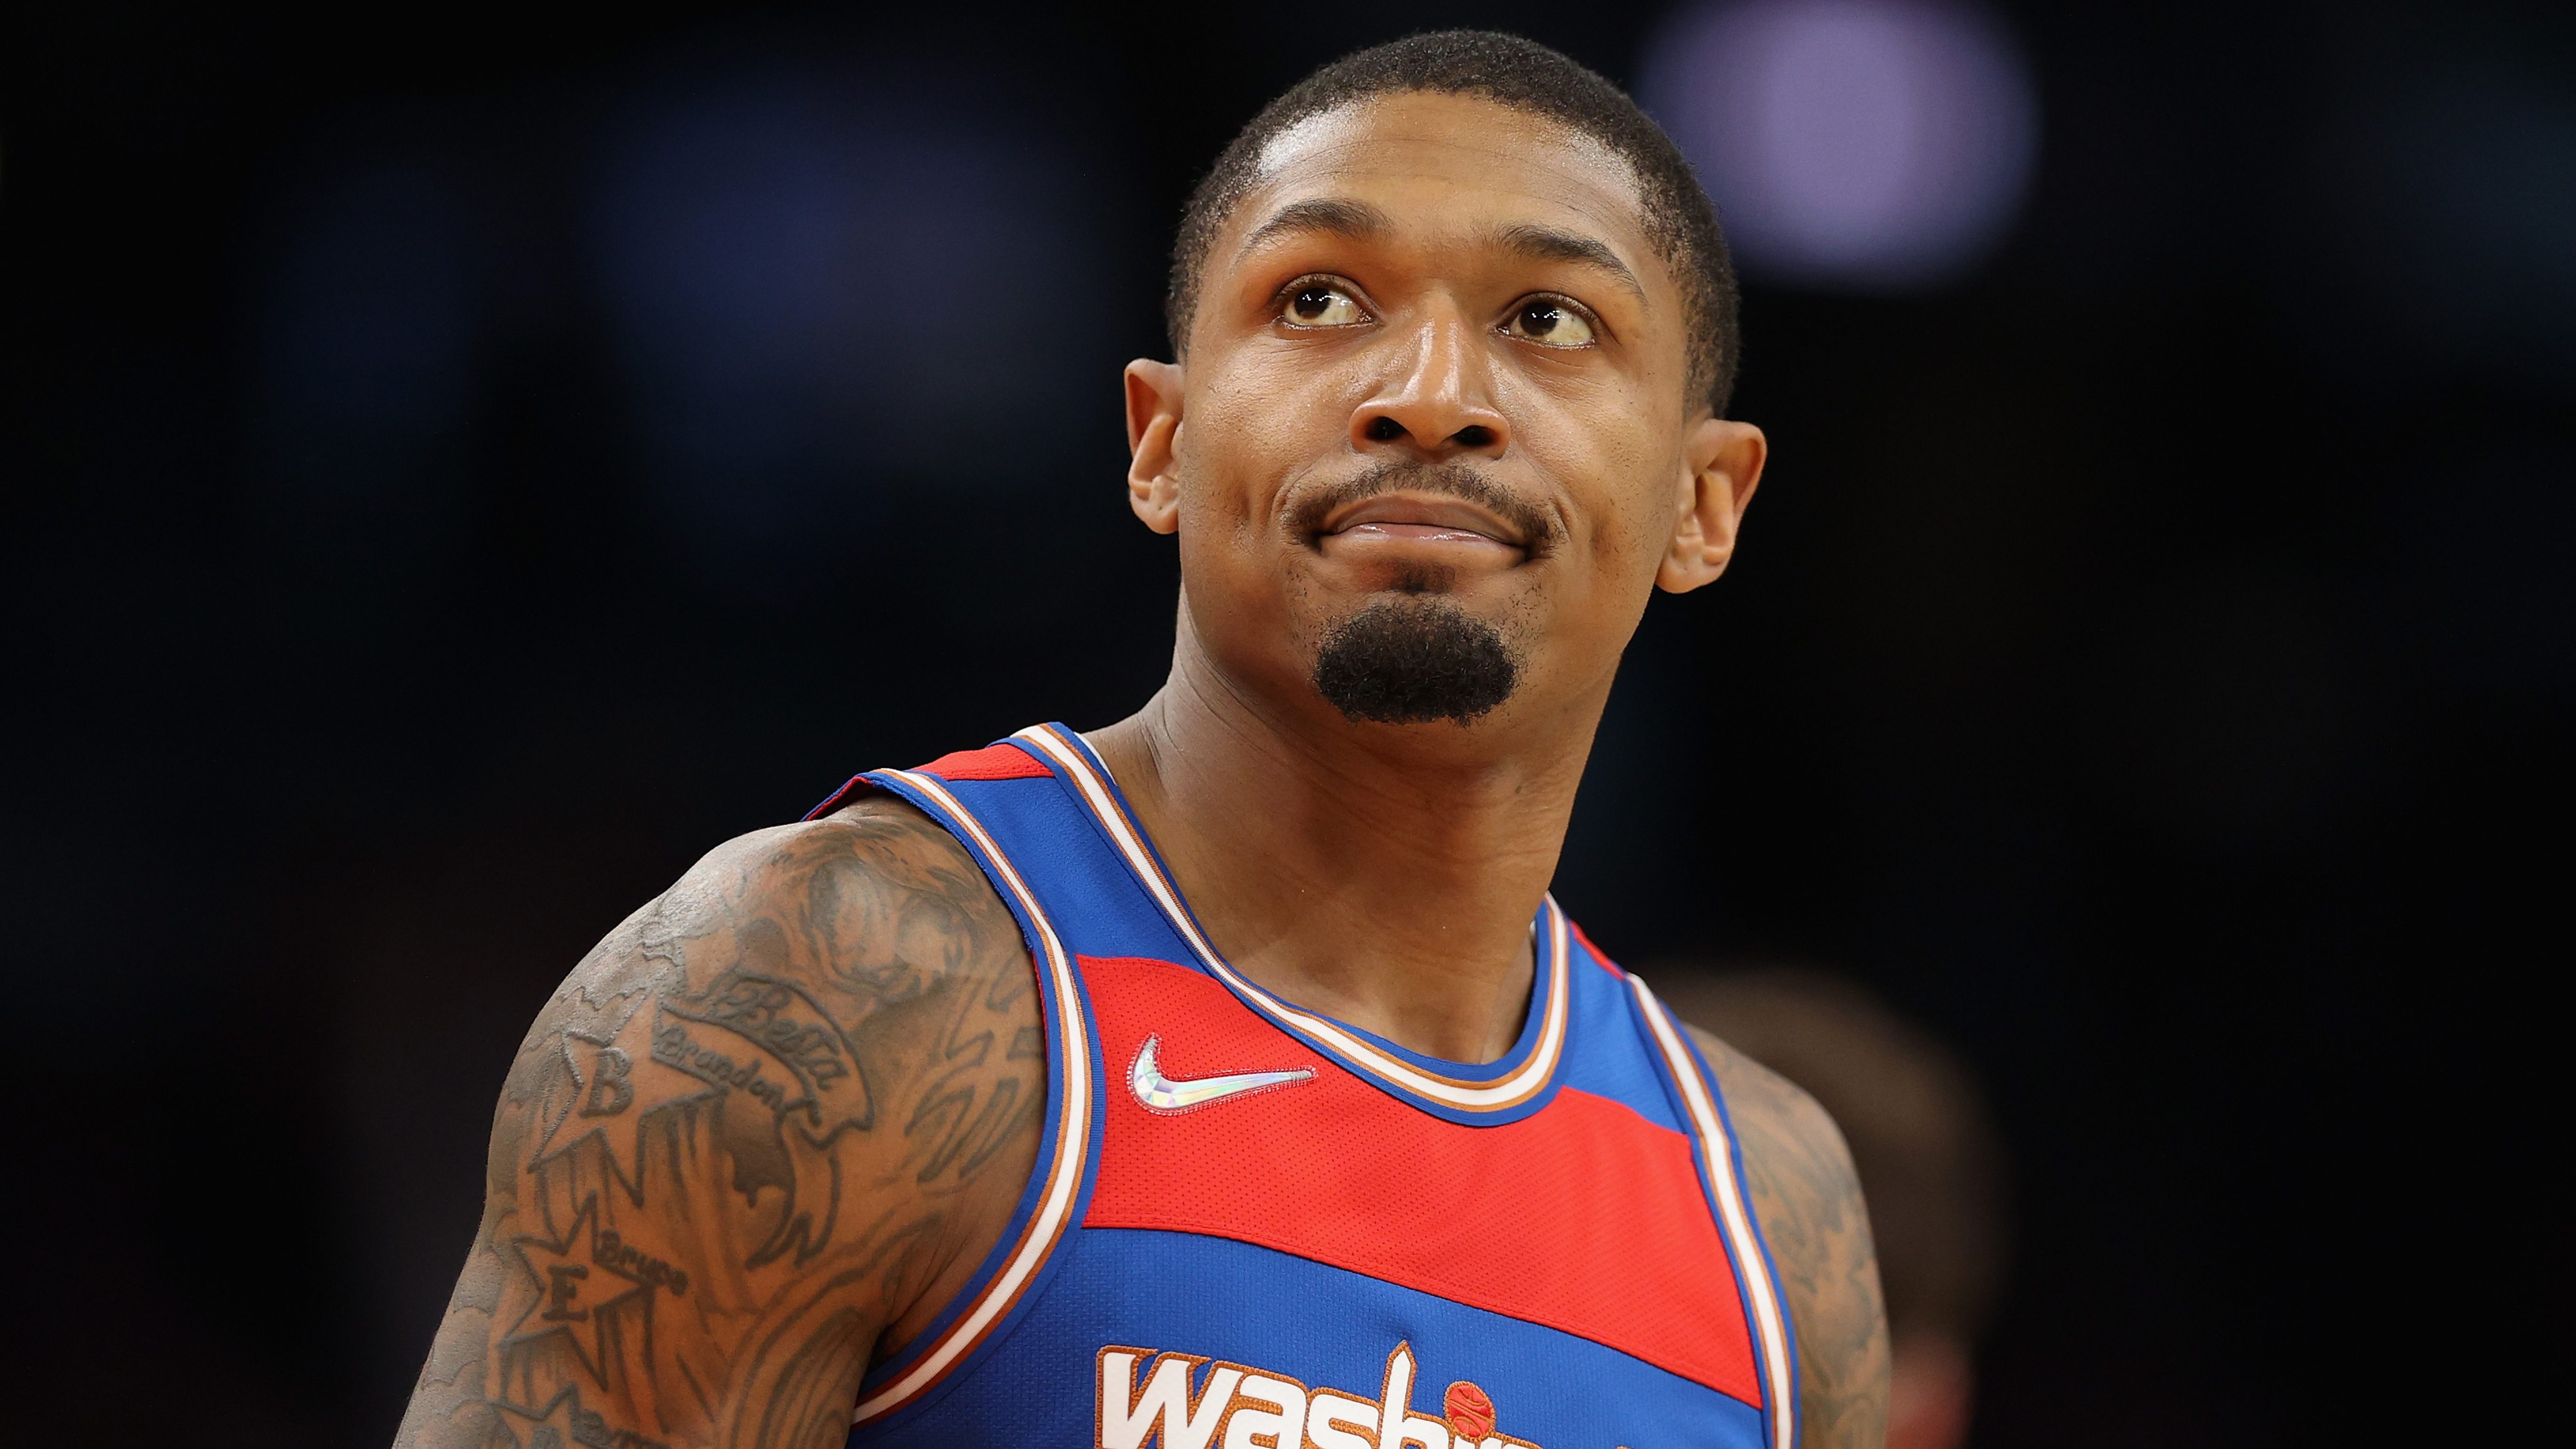 Miami Heat Lands Bradley Beal in Trade Proposed by B/R